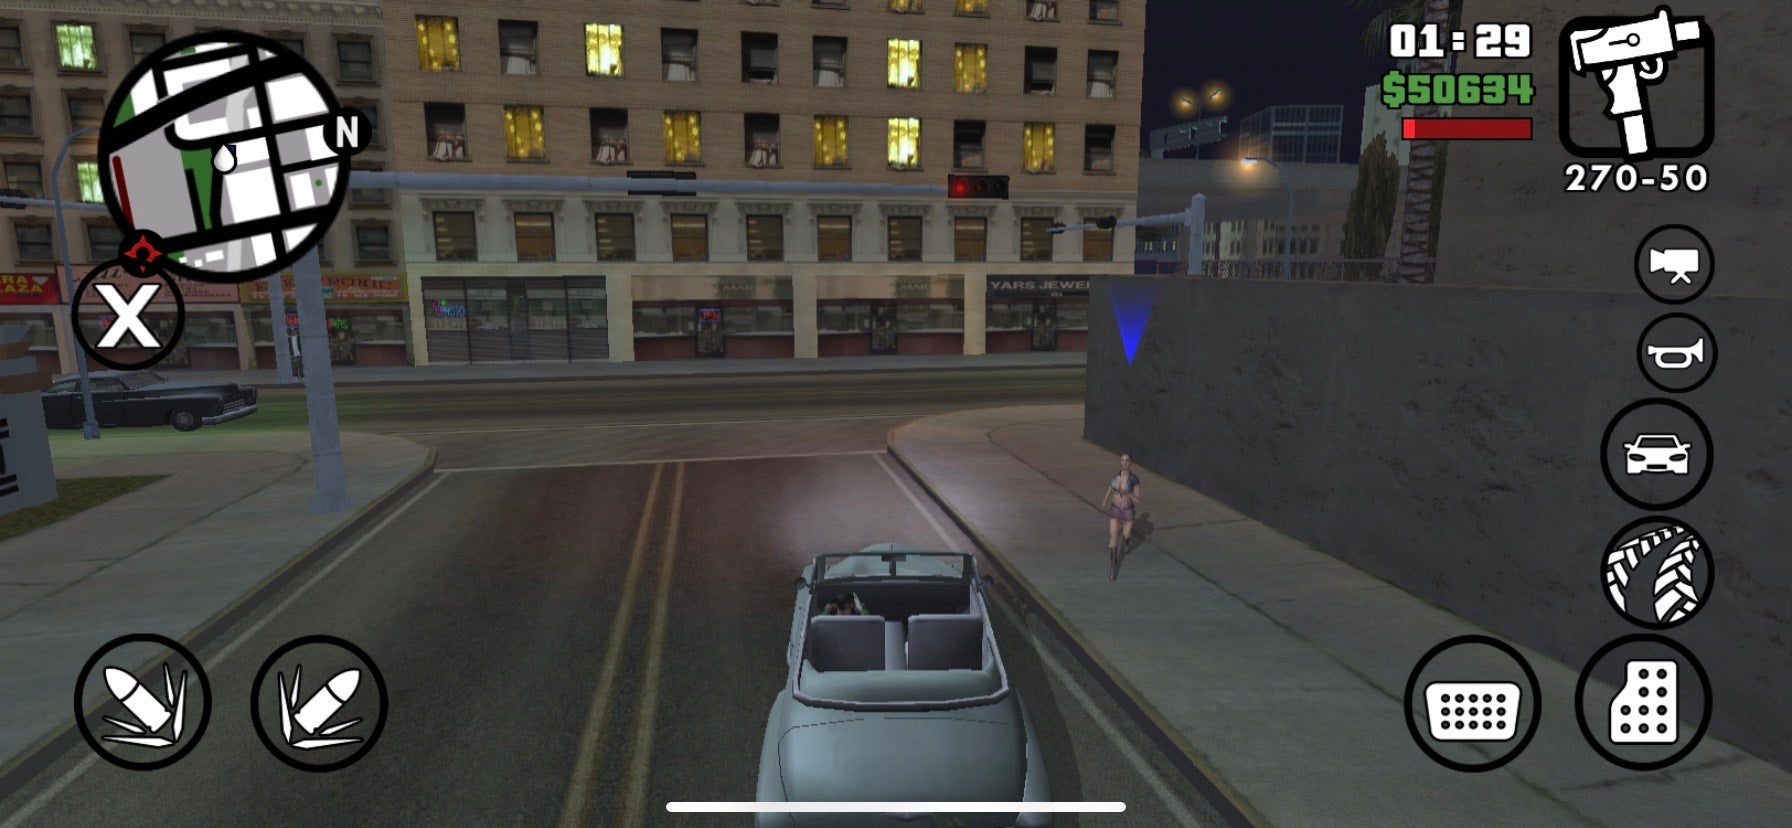 Gta San Andreas Prostitute currency cost